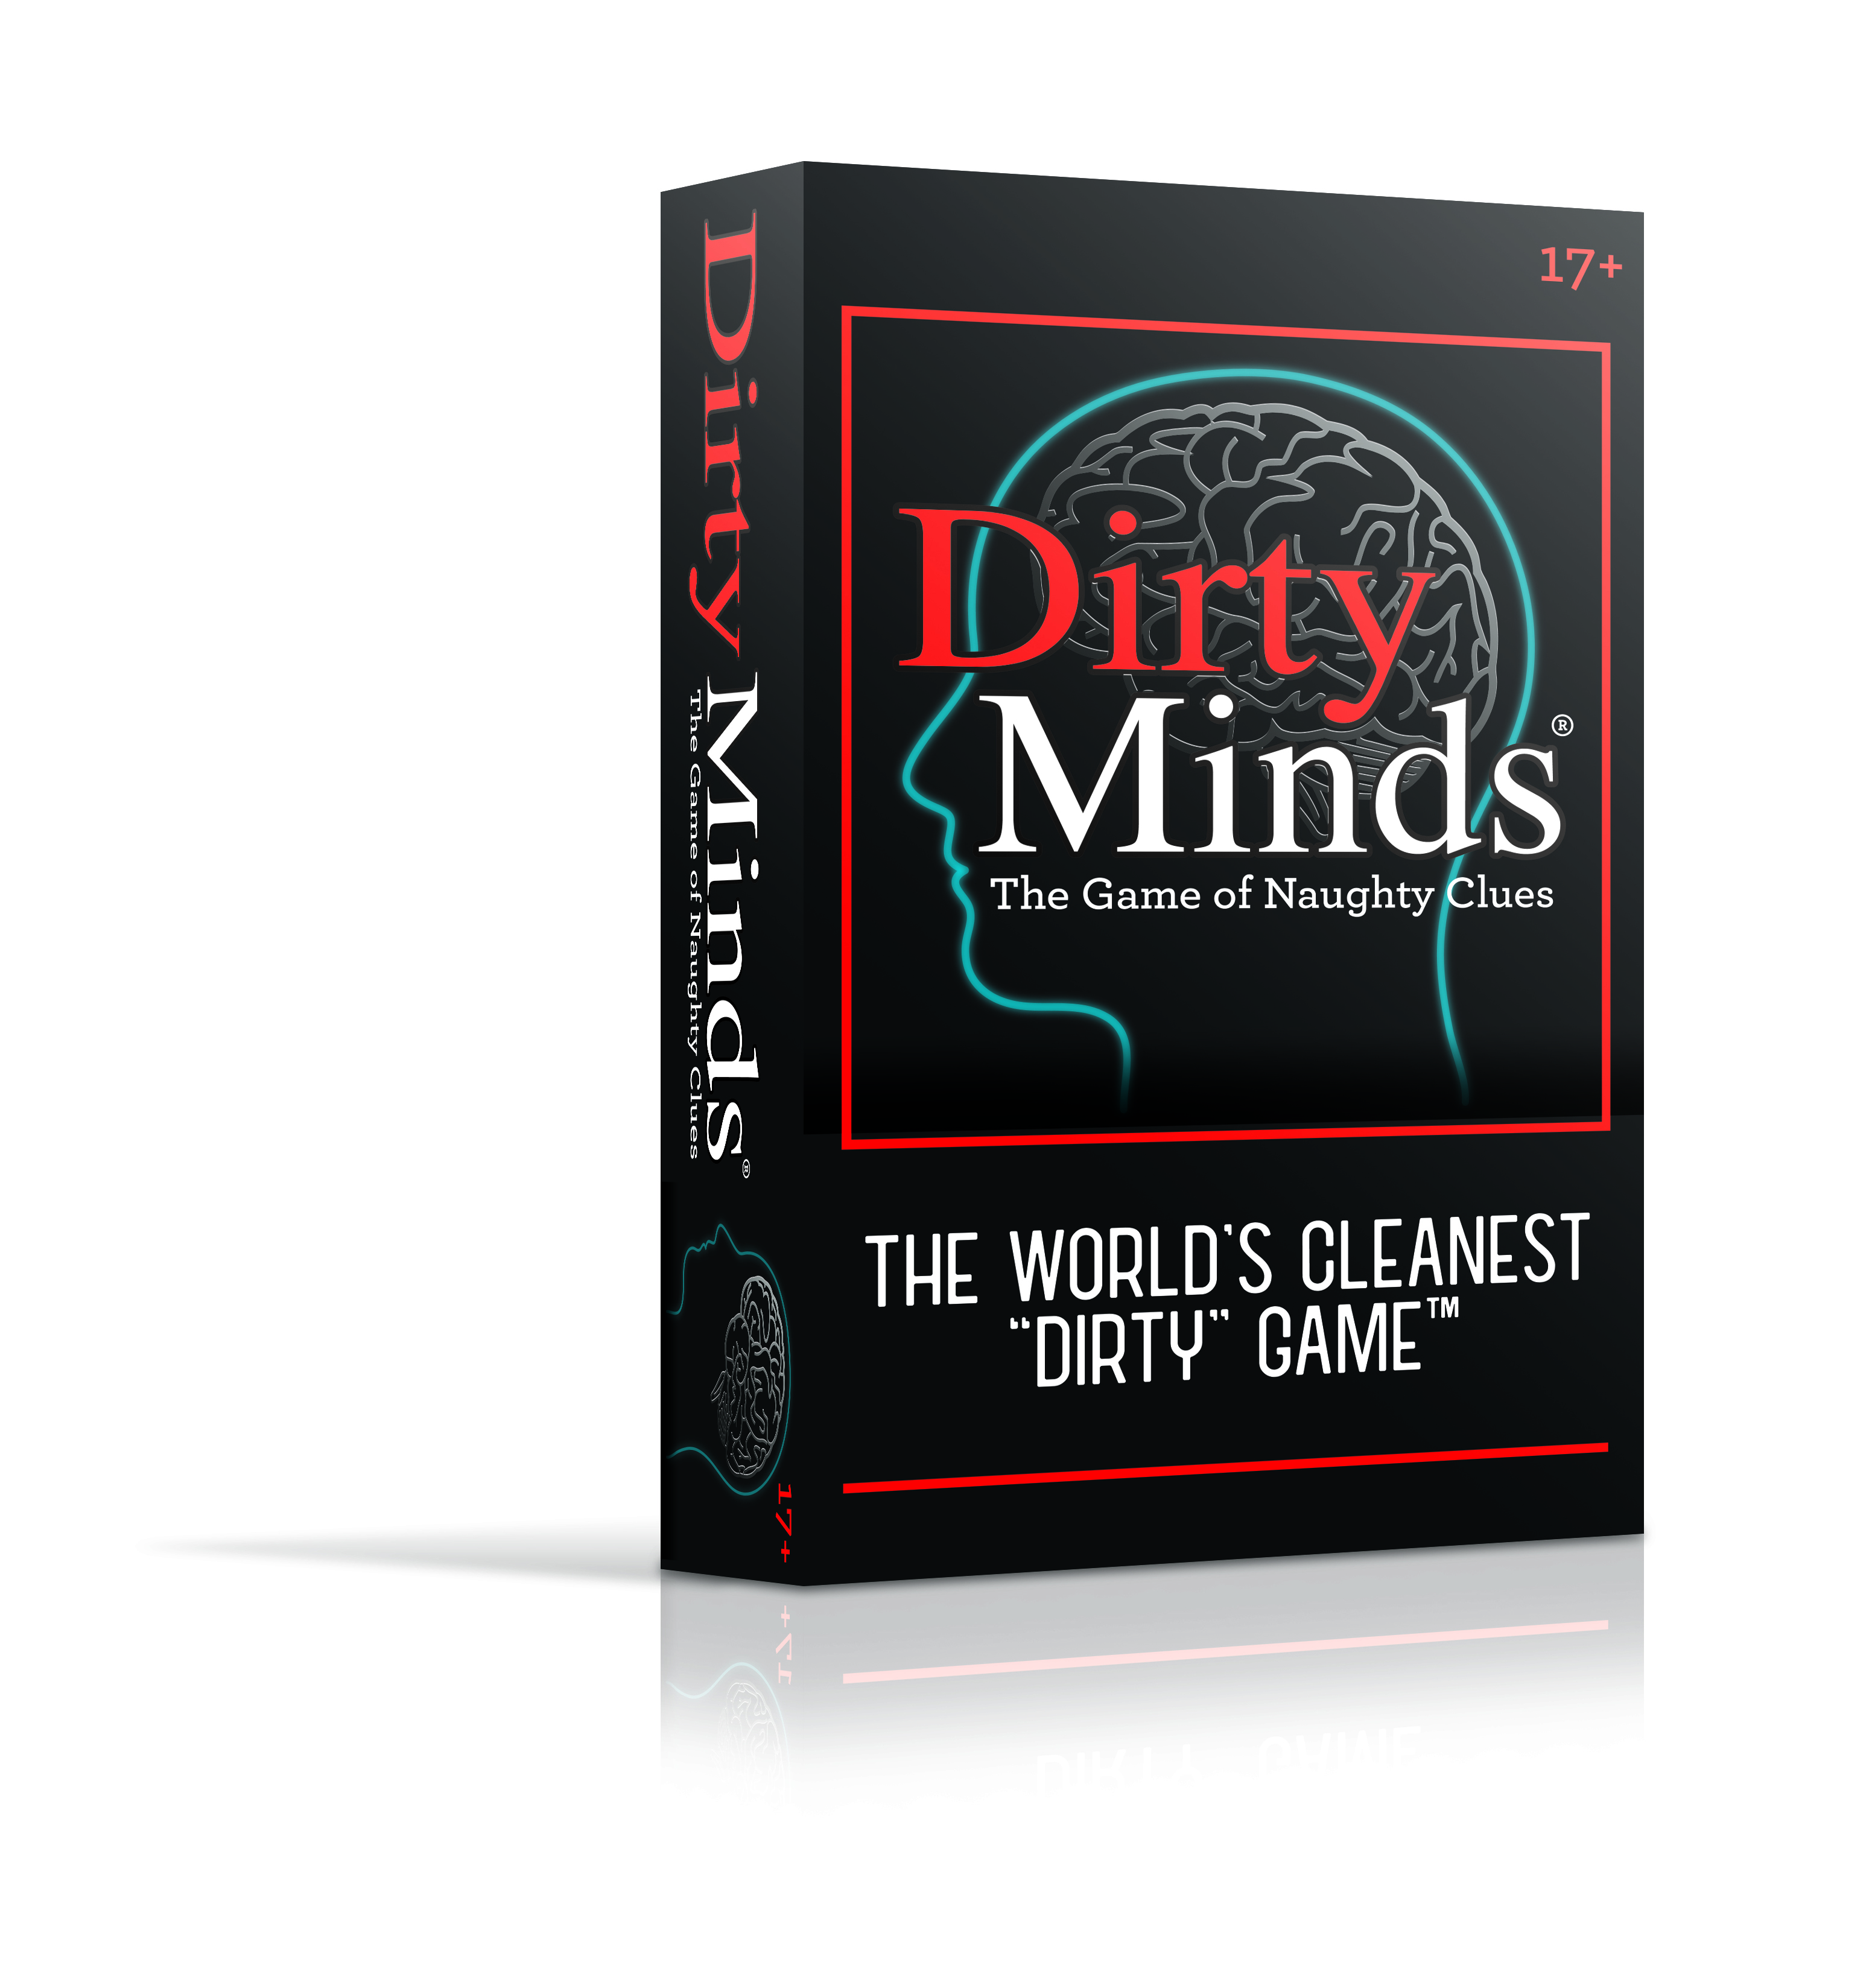 Dirty Minds The Game of Naughty Clues S11 for sale online 